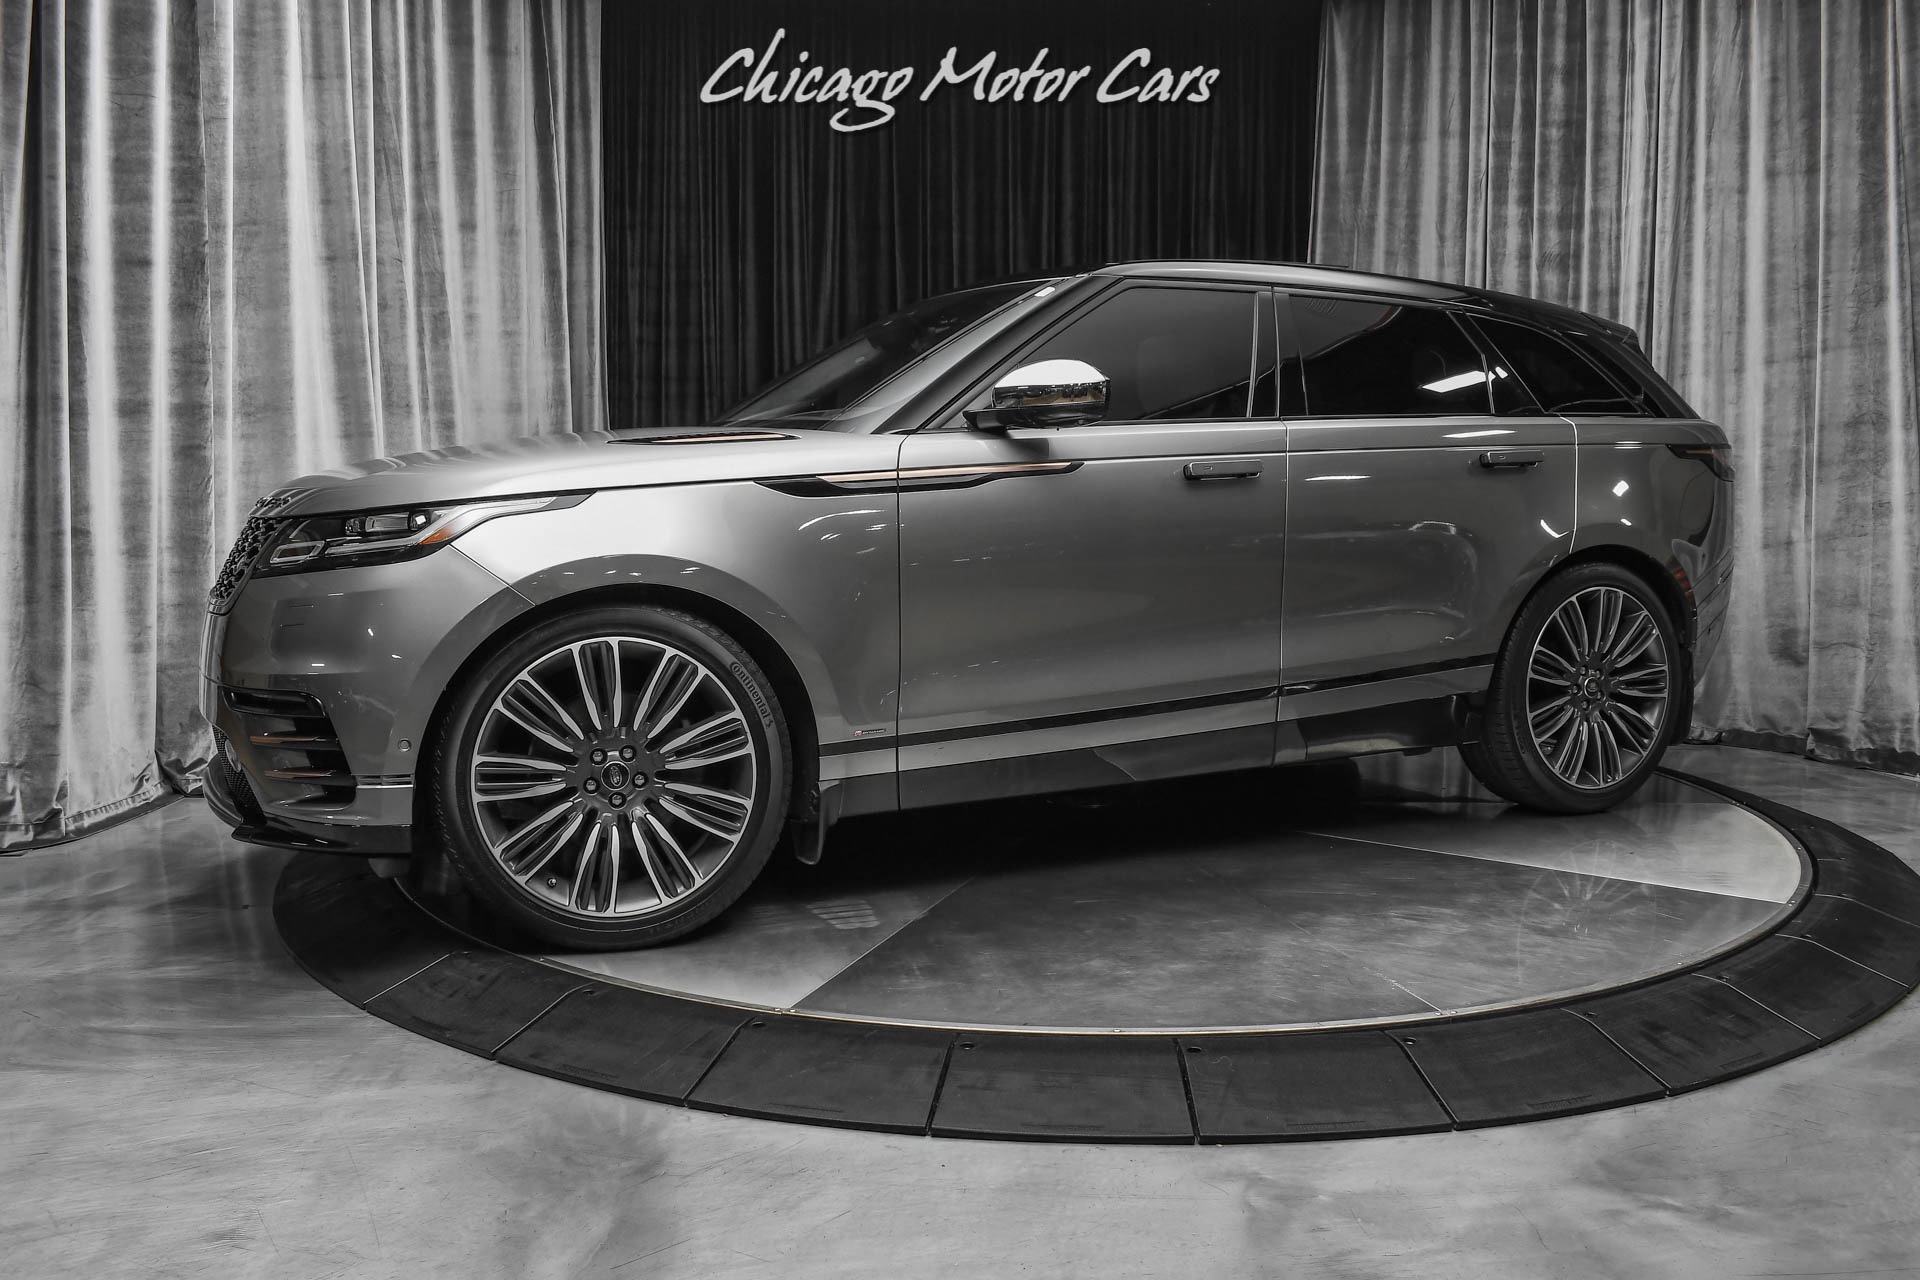 Used-2018-Land-Rover-Range-Rover-Velar-P380-First-Edition-93kMSRP-Styling-Accent-Package